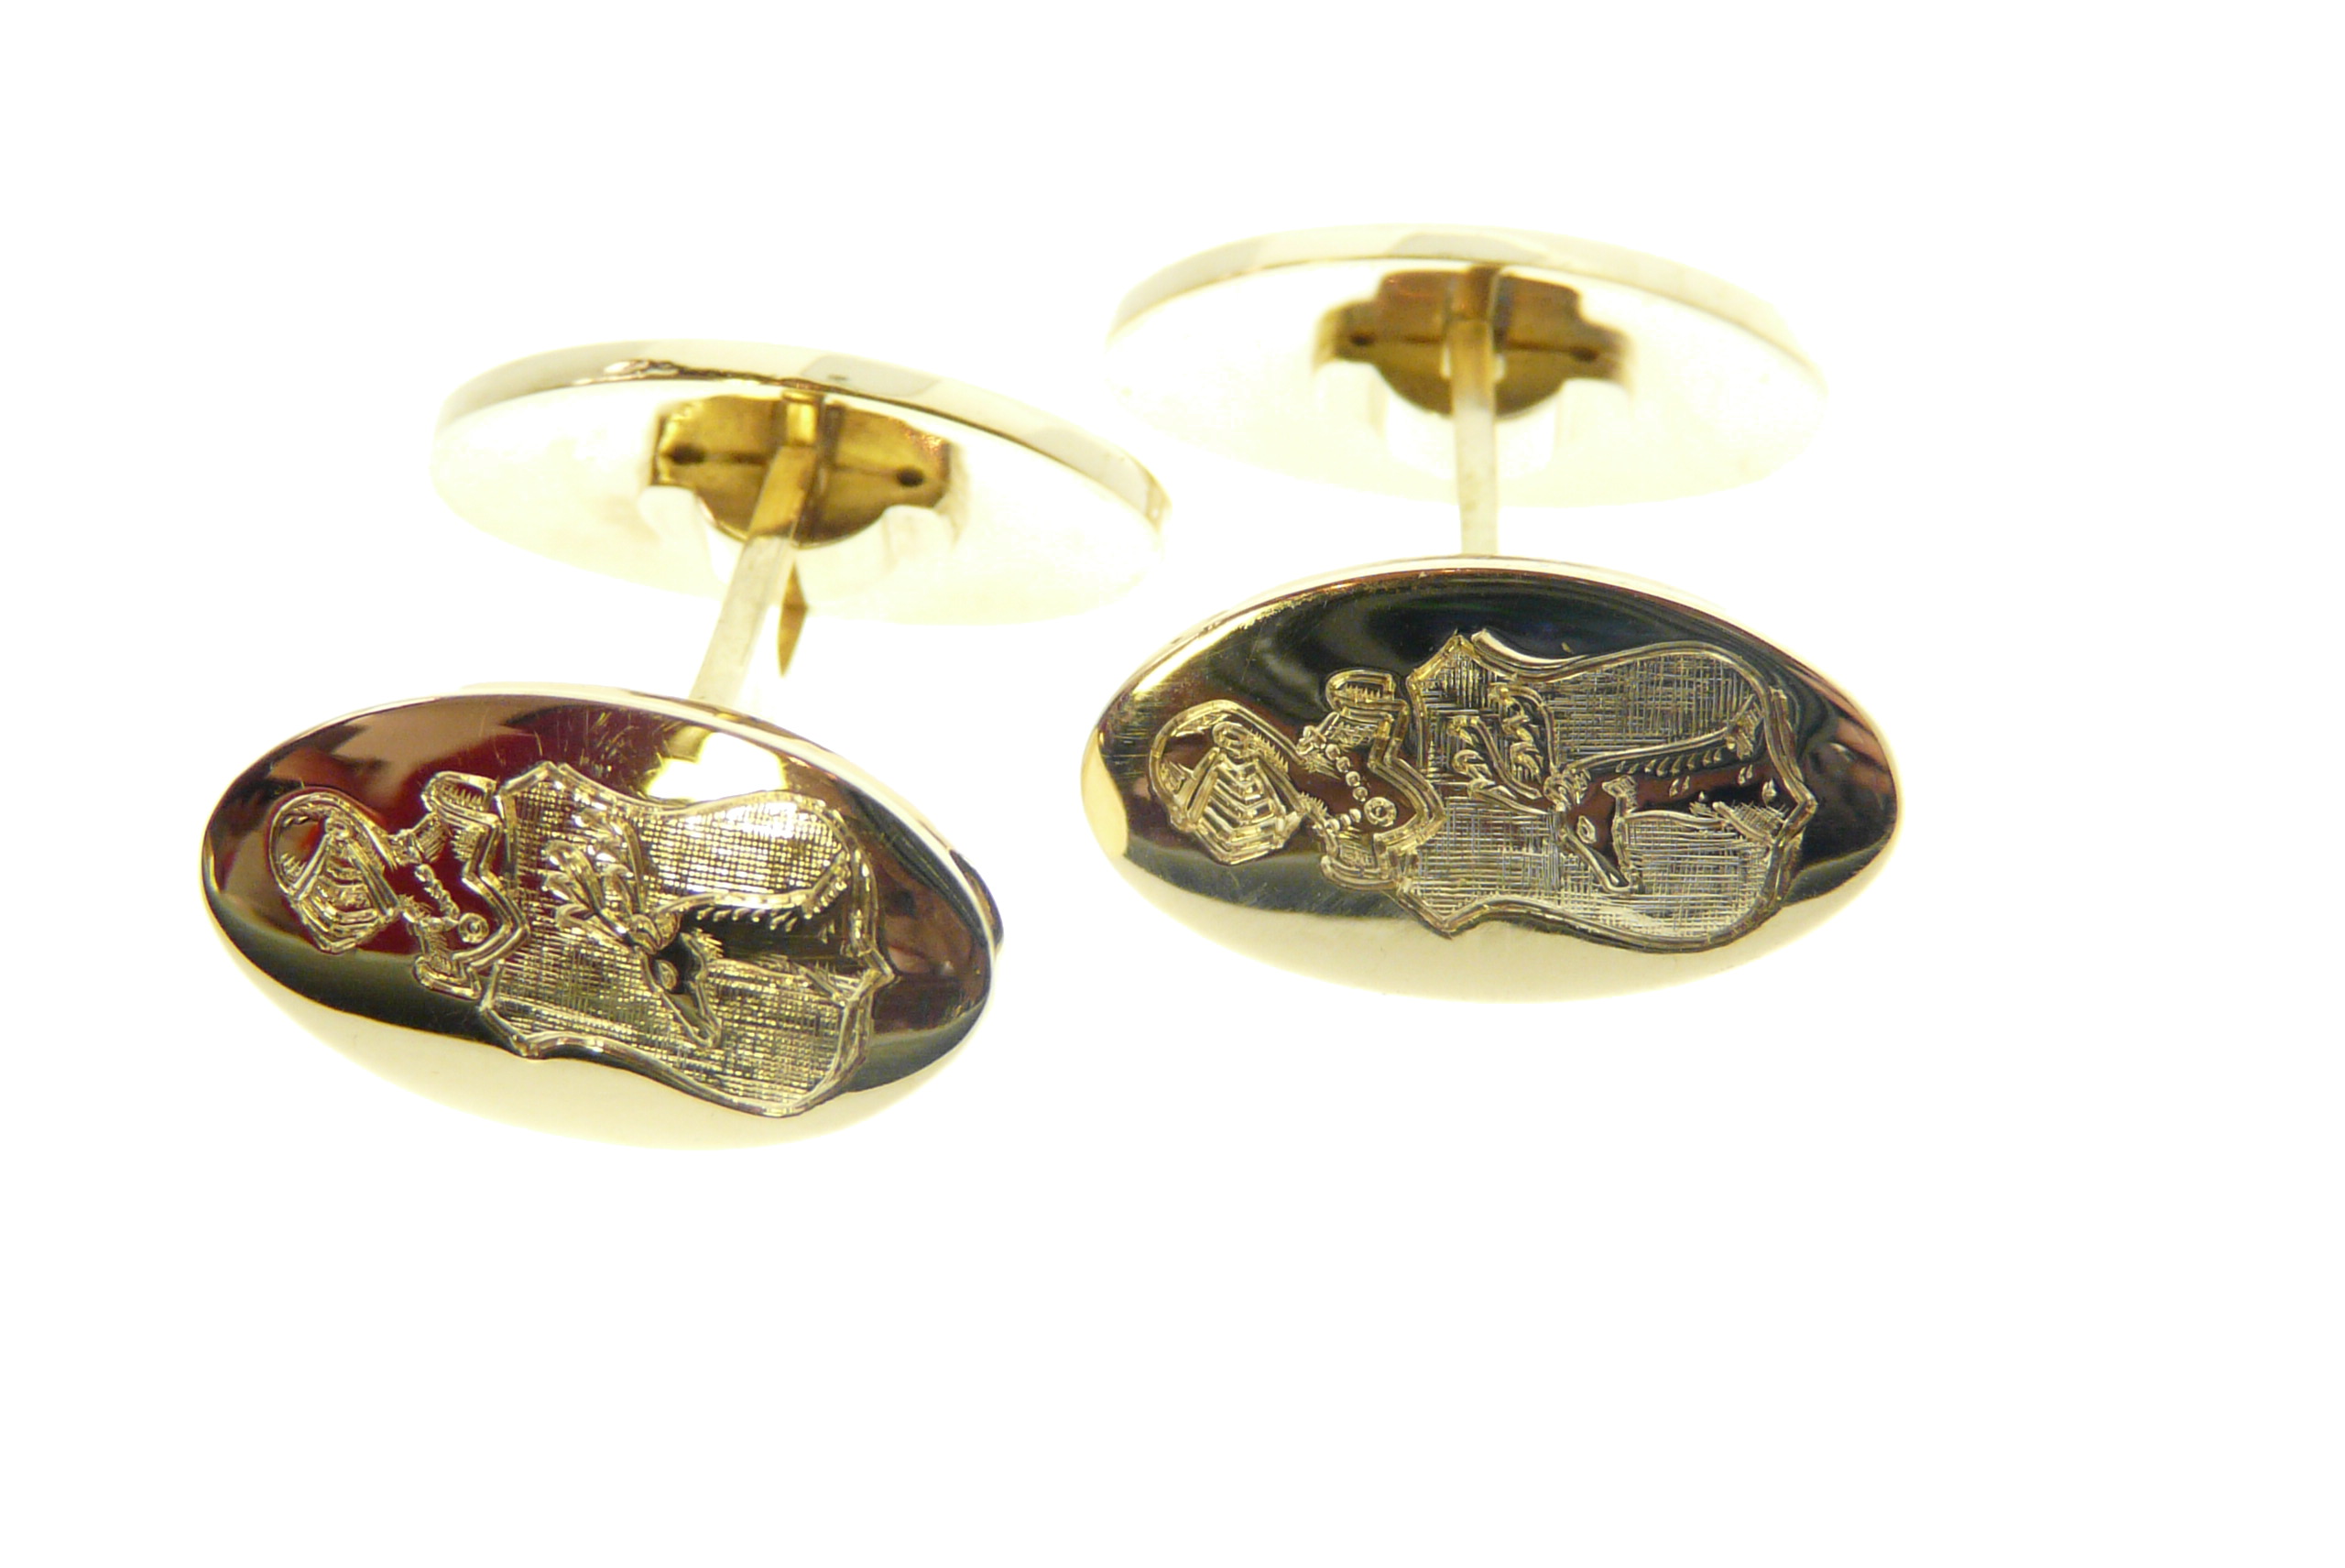 Gold cuff links with engraved coat of arms